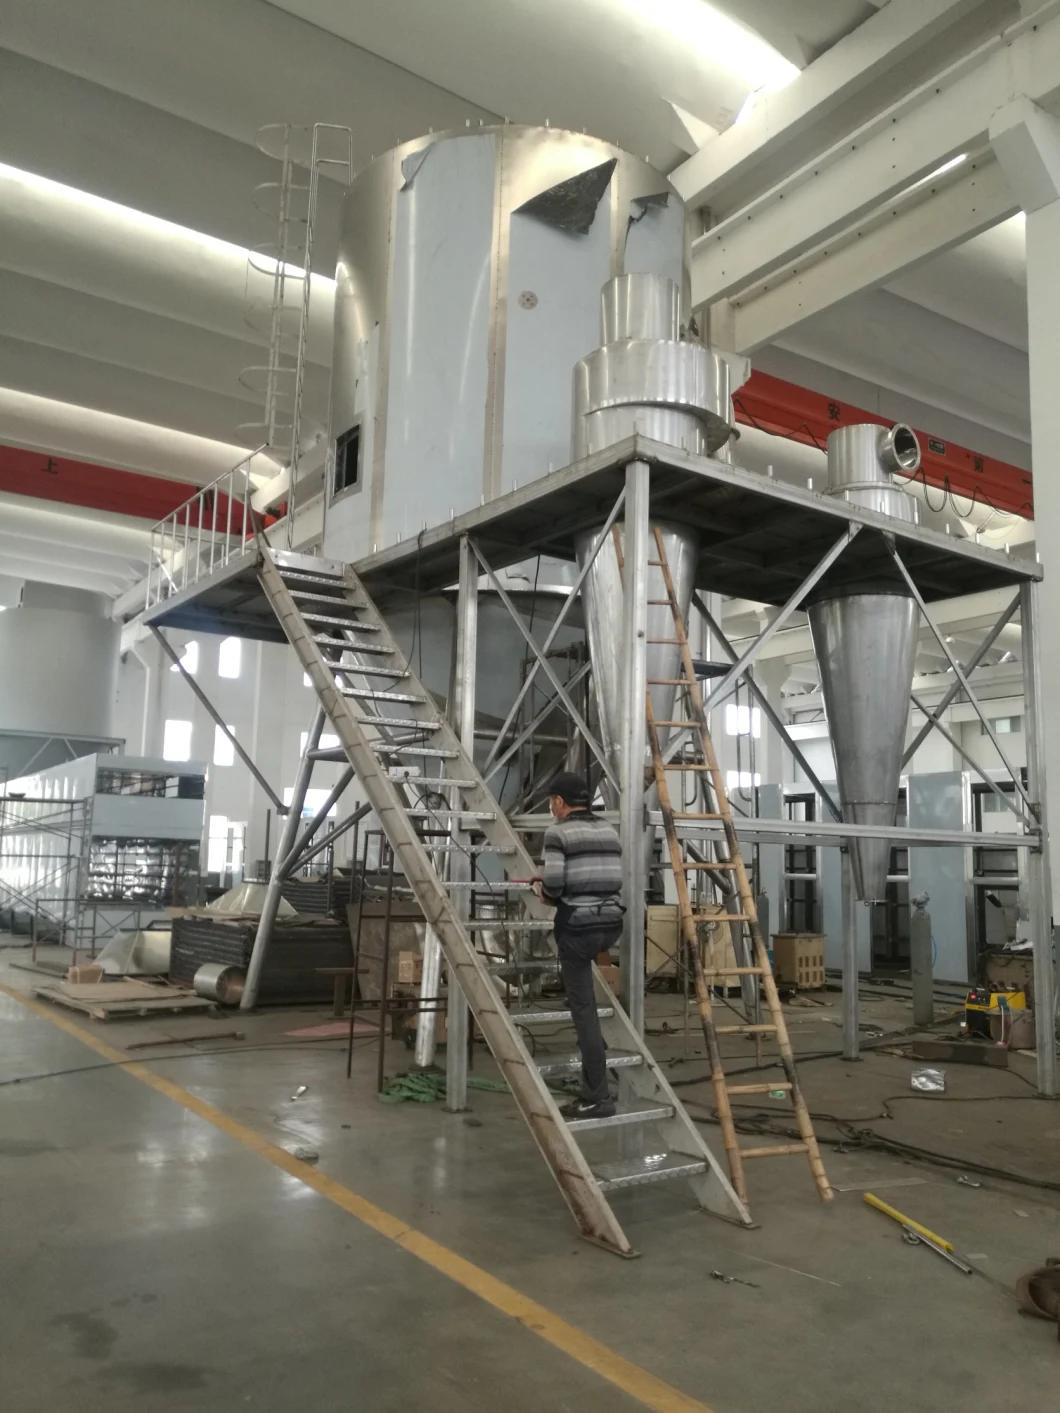 New Condition and 1 Year Warranty Biomass Pellet Burner for The Spray Dryer /Vertical Dryer/Horizontal Dryer